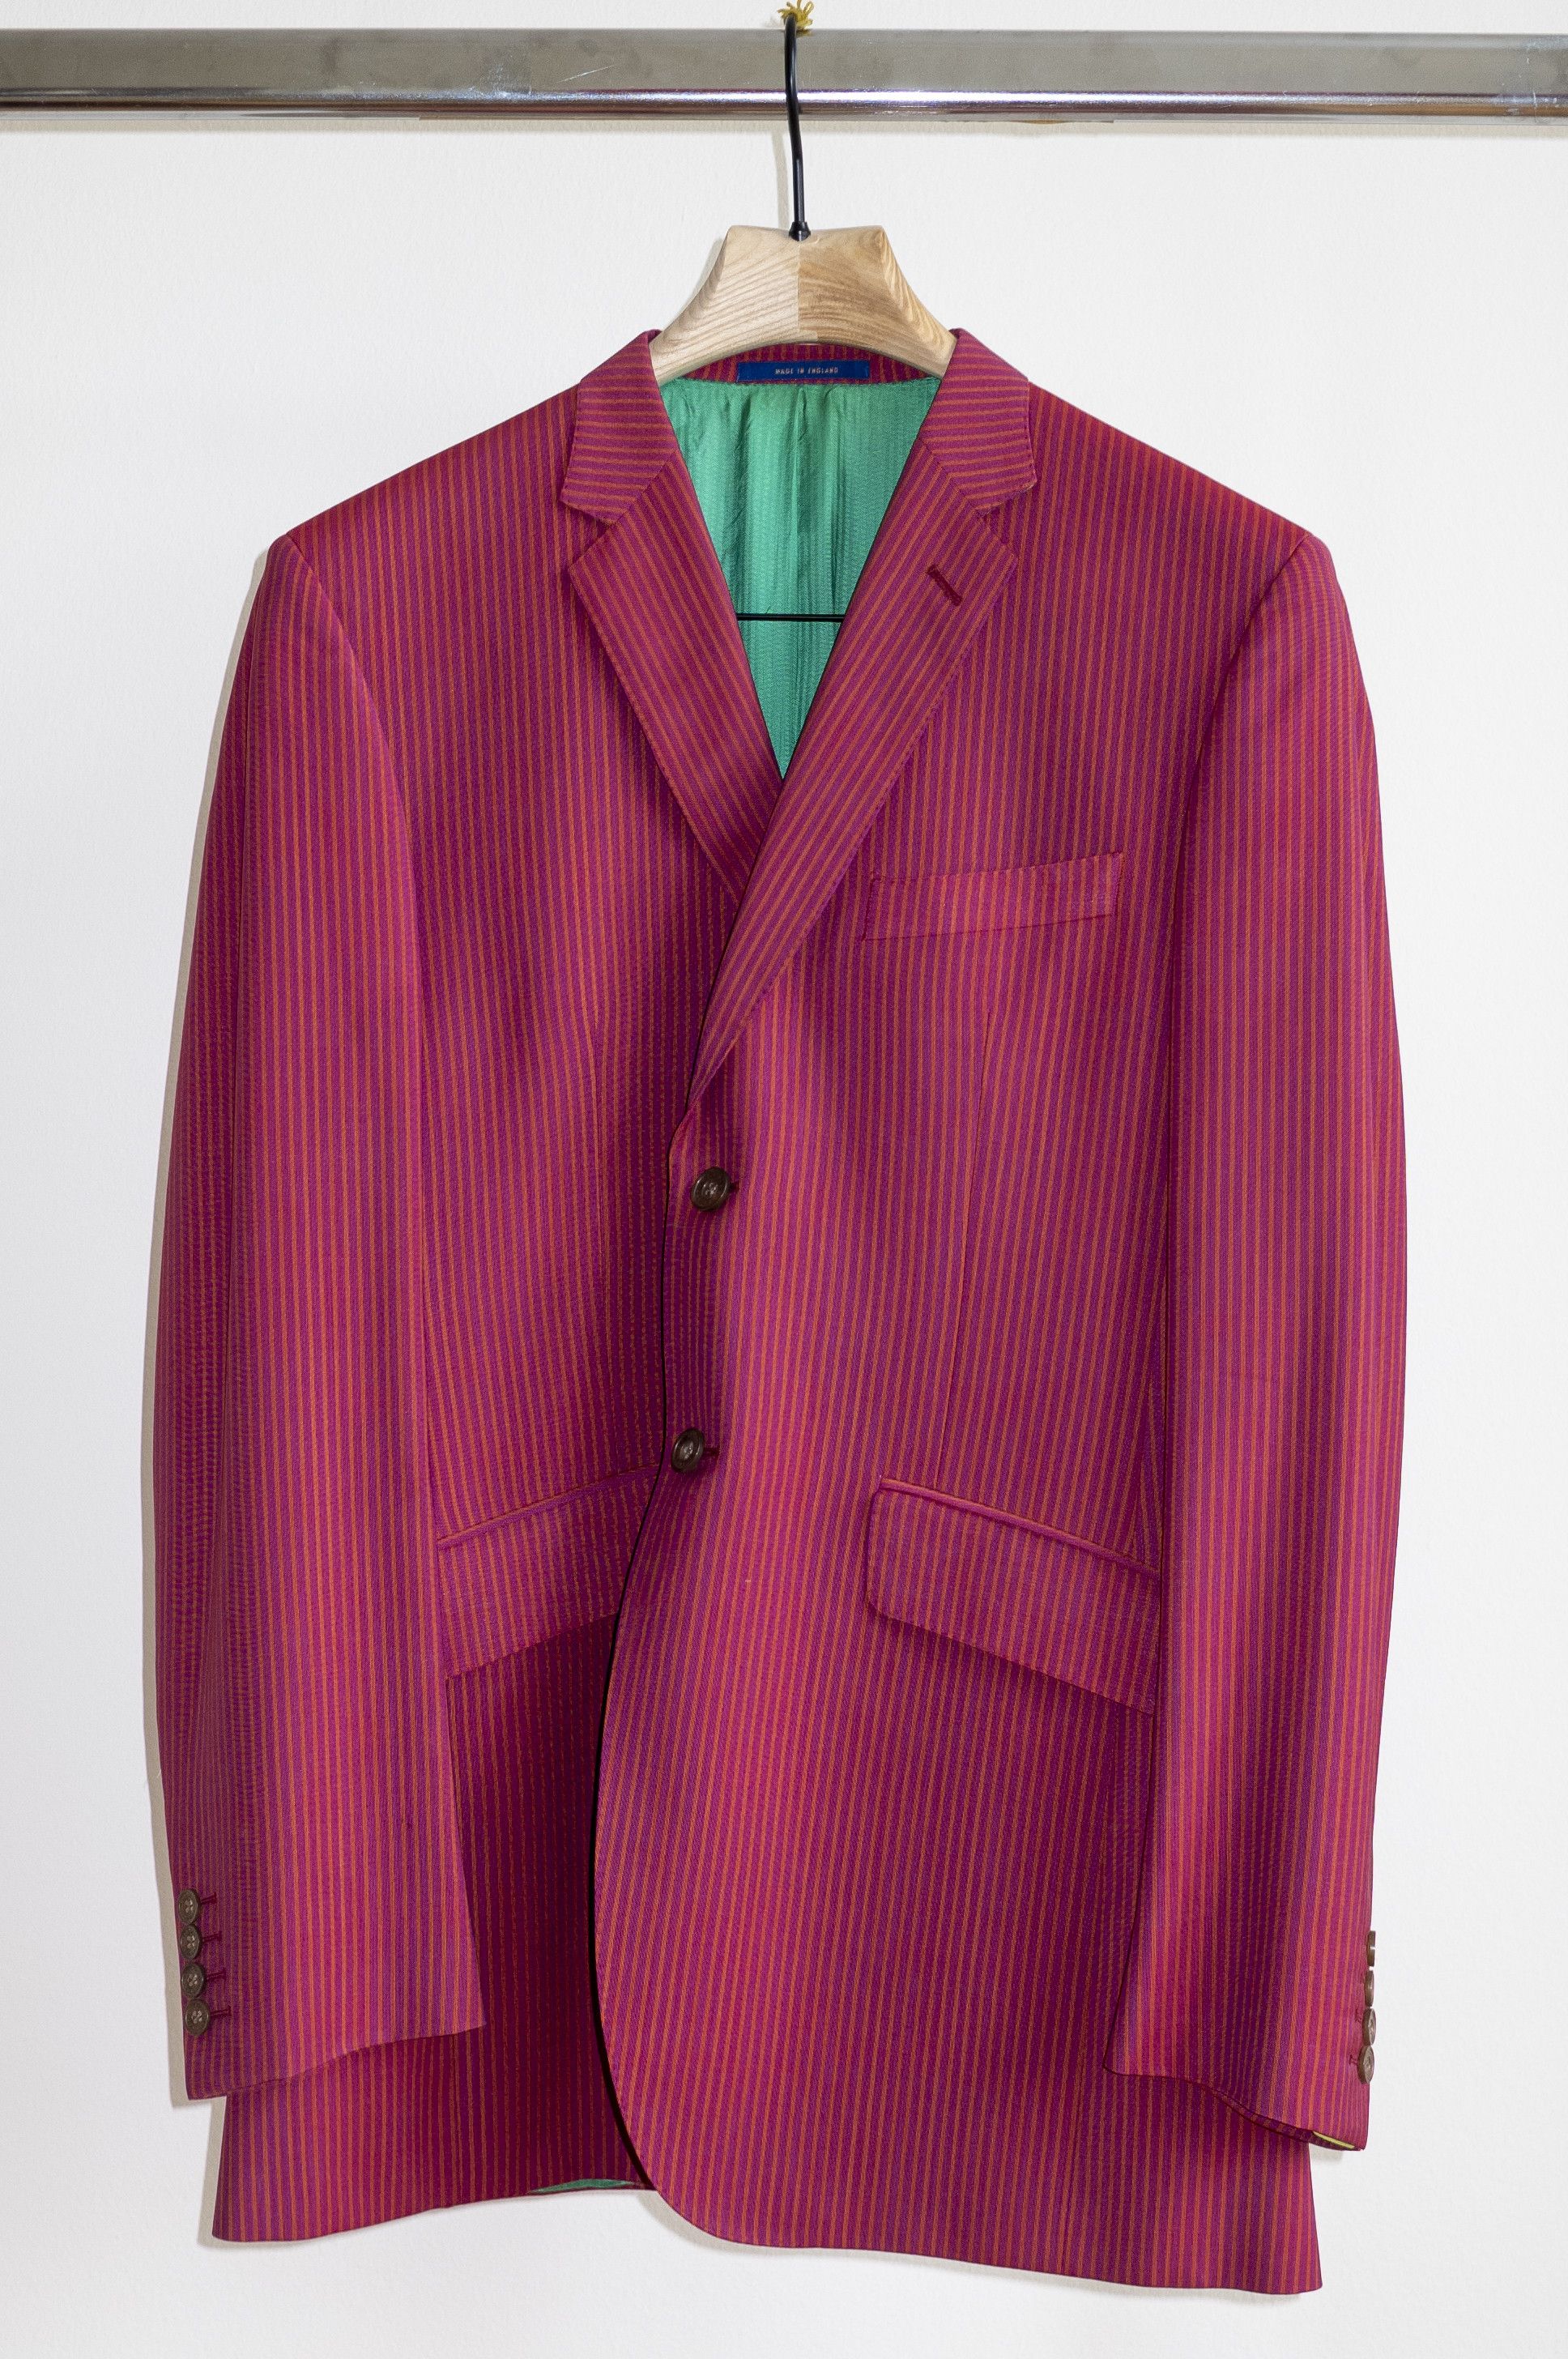 Ozwald Boateng Cranberry Stripe Suit | Grailed